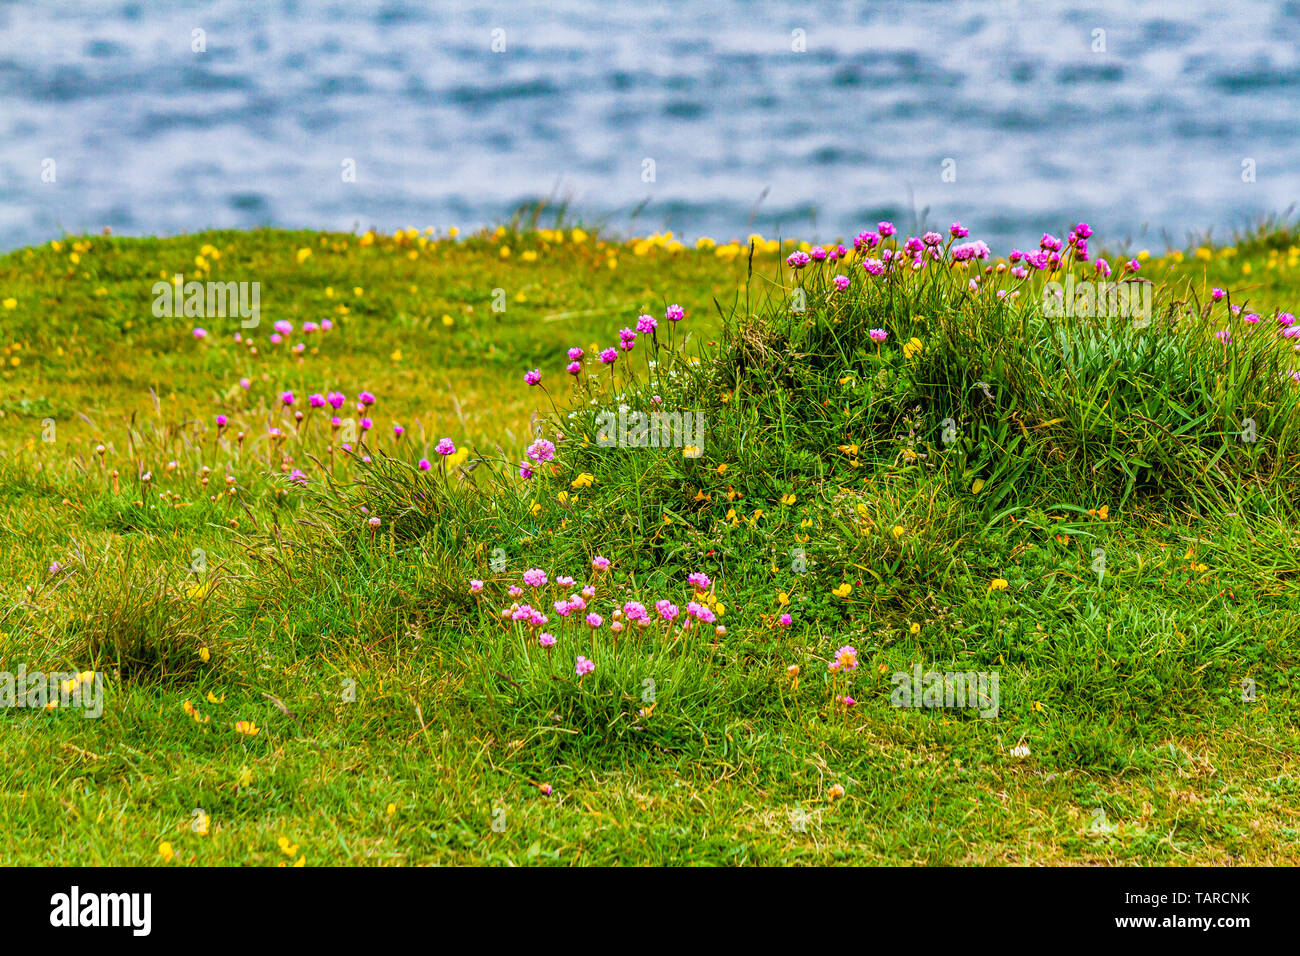 Sea pinks, also known as thrift or Armeria maritima, growing on a clifftop in Northumberland, UK. June 2018. Stock Photo